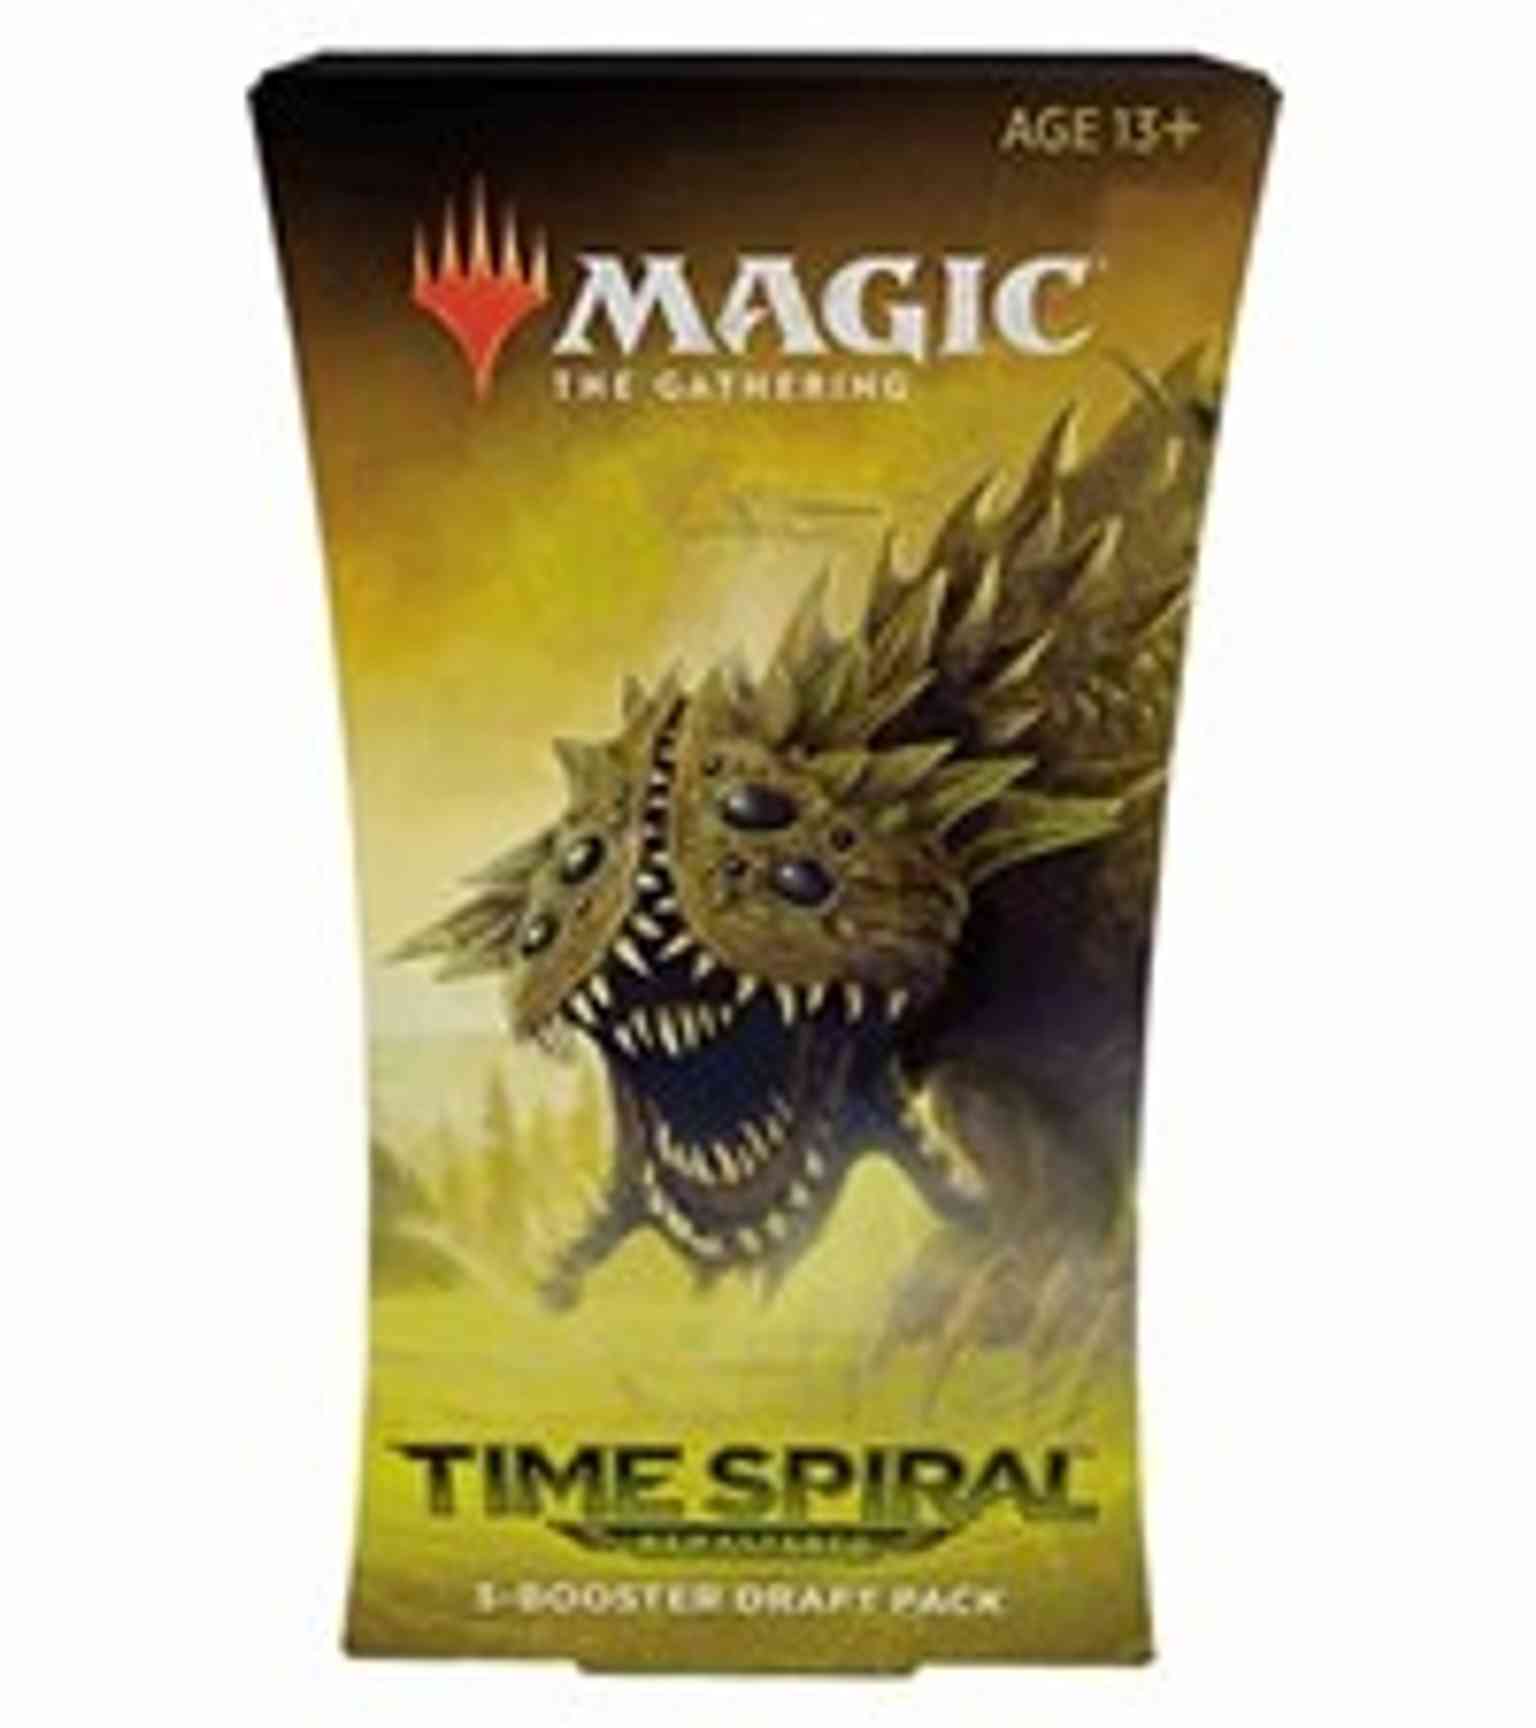 Time Spiral: Remastered - 3-Booster Draft Pack magic card front